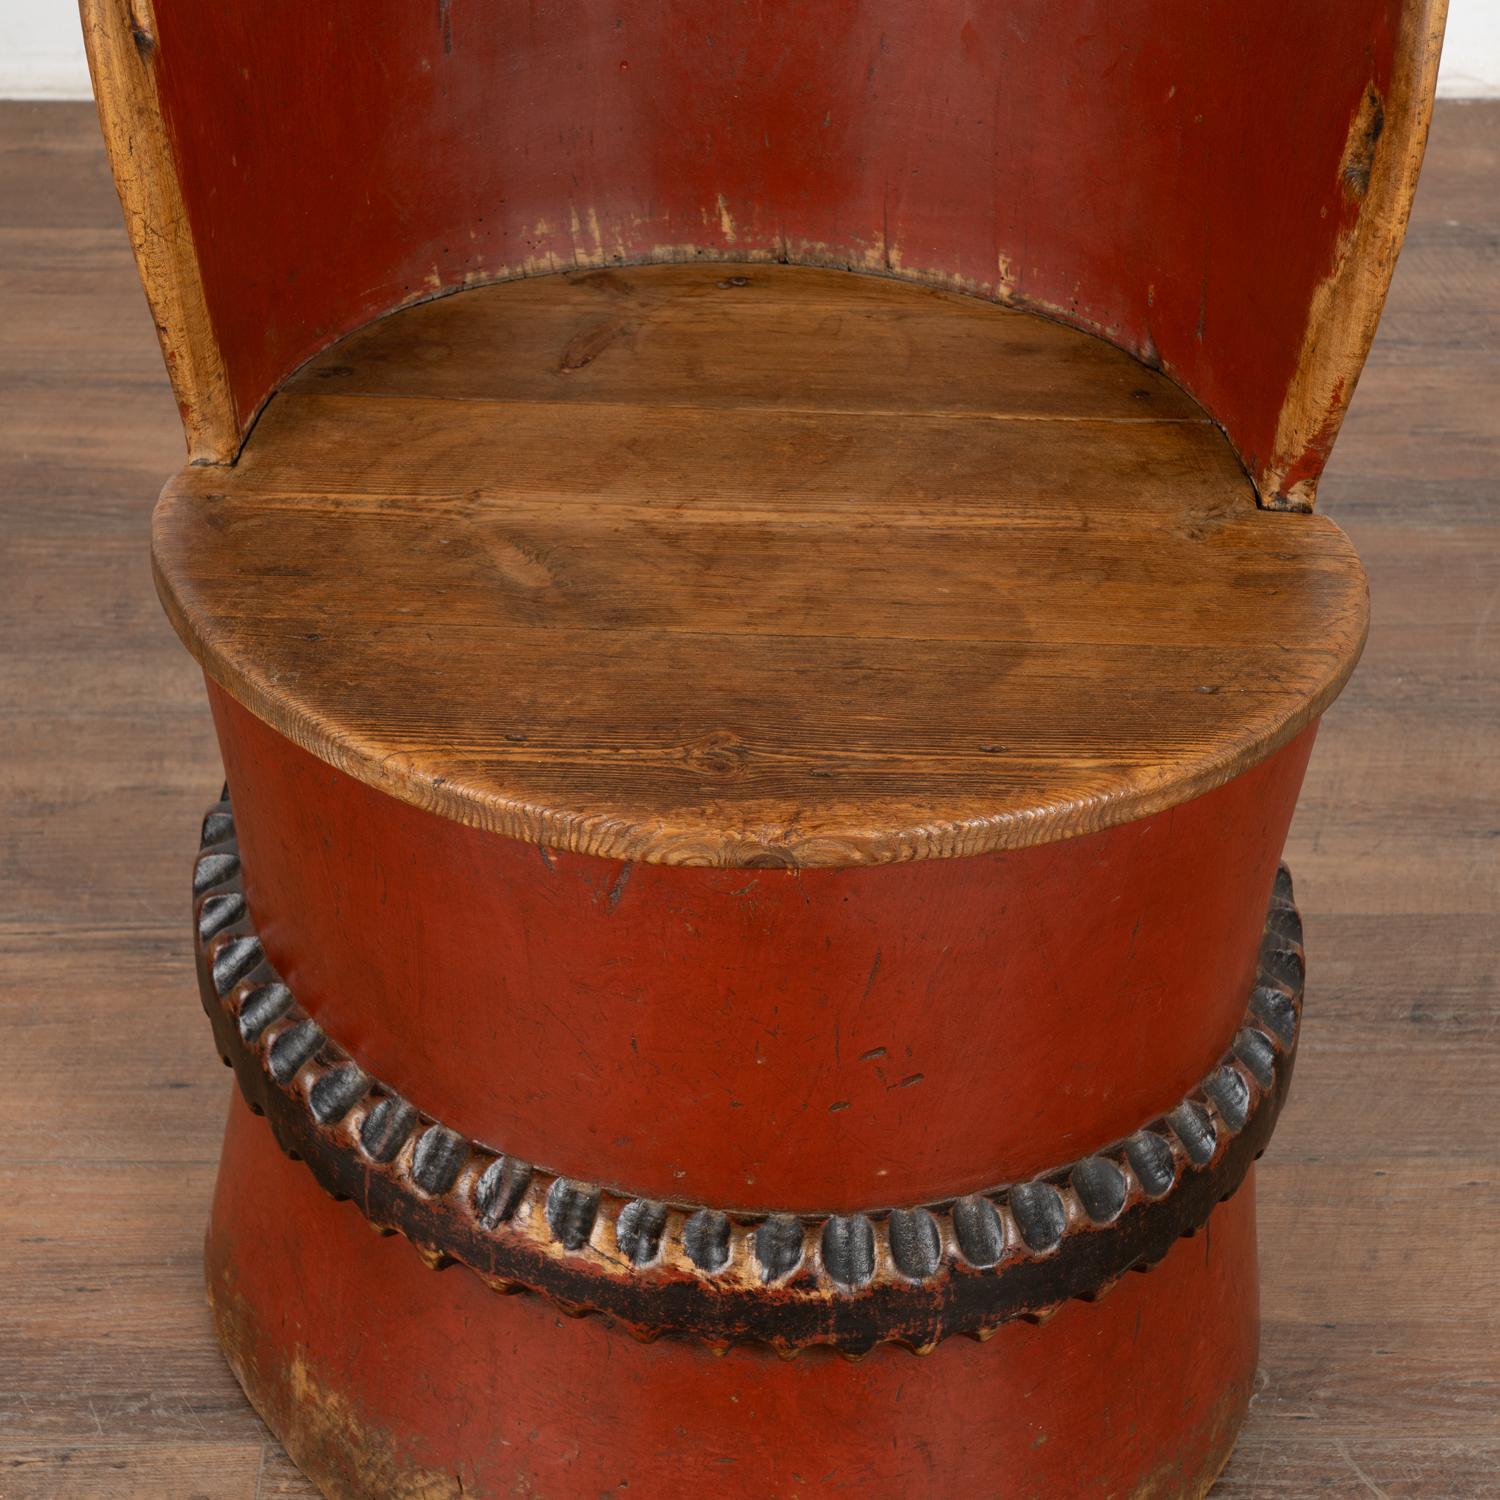 Wood Original Red Painted Kubbestol Log Chair, Sweden circa 1860-80 For Sale